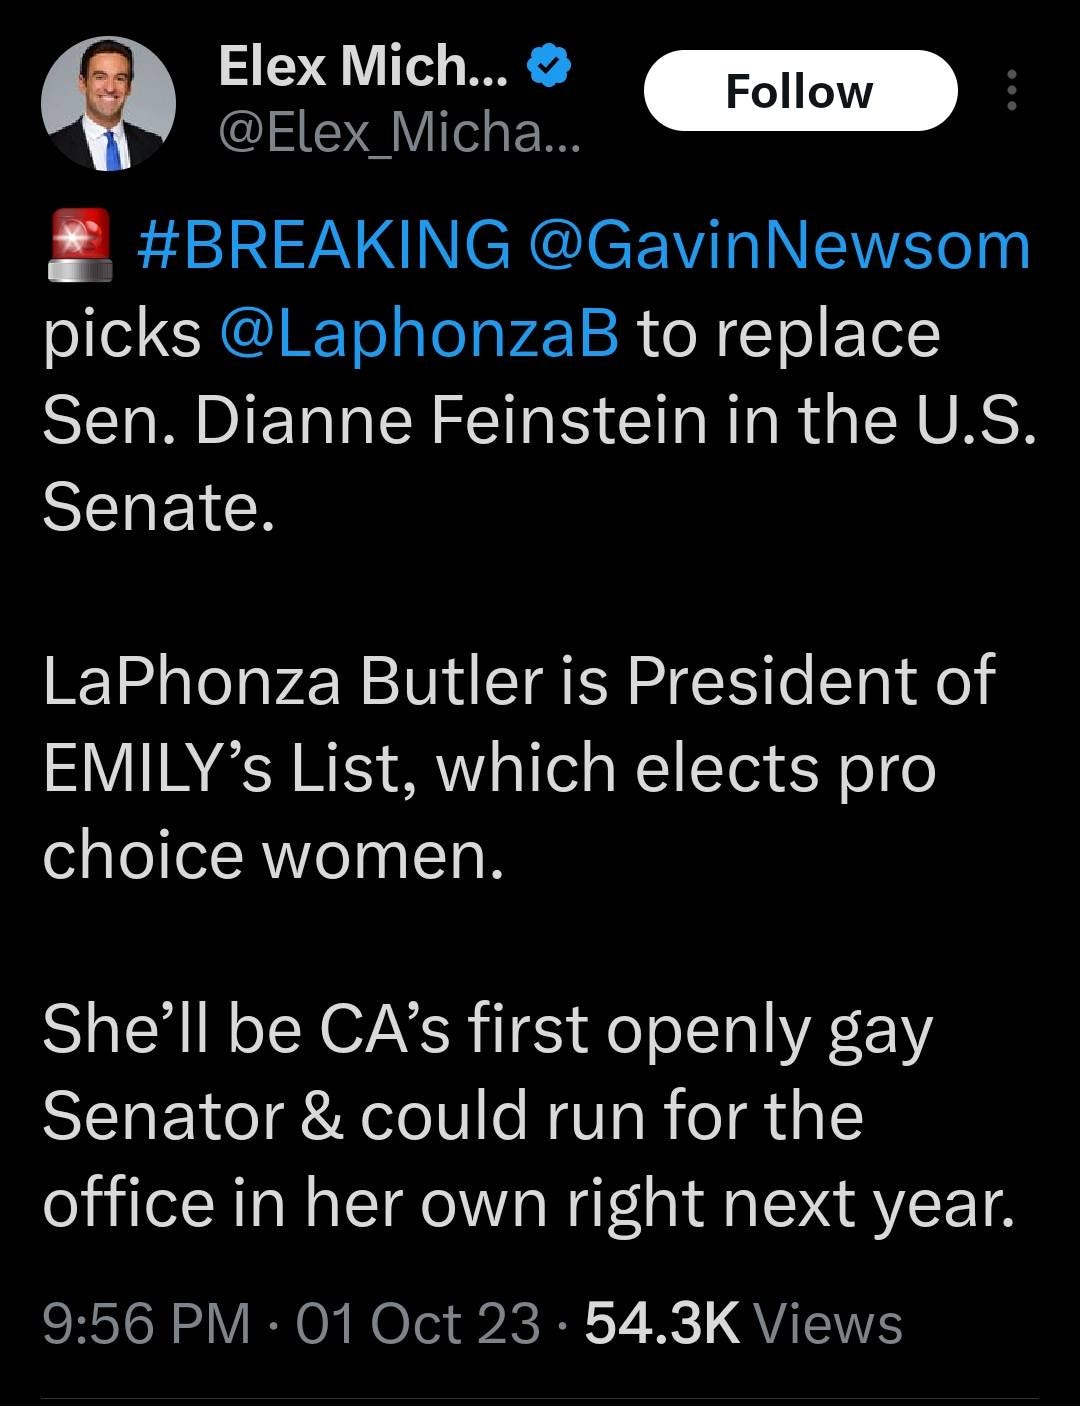 May be a graphic of 1 person and text that says '10:29 5G 18% Post Elex Mich... @Elex_ cha.. Follow #BREAKING GavinNewsom picks LaphonzaB to replace Sen. Dianne Feinstein in the U.S. Senate. LaPhonza Butler is President of EMILY's List, which elects pro choice women. She'll be CA's first openly gay Senator& could run for the office in her own right next year. 9:56 PM 01 Oct23 54.3K iews 30 Reposts 15 Quotes 82 Likes 2 Bookma ks ↑7 ៣ Post your'